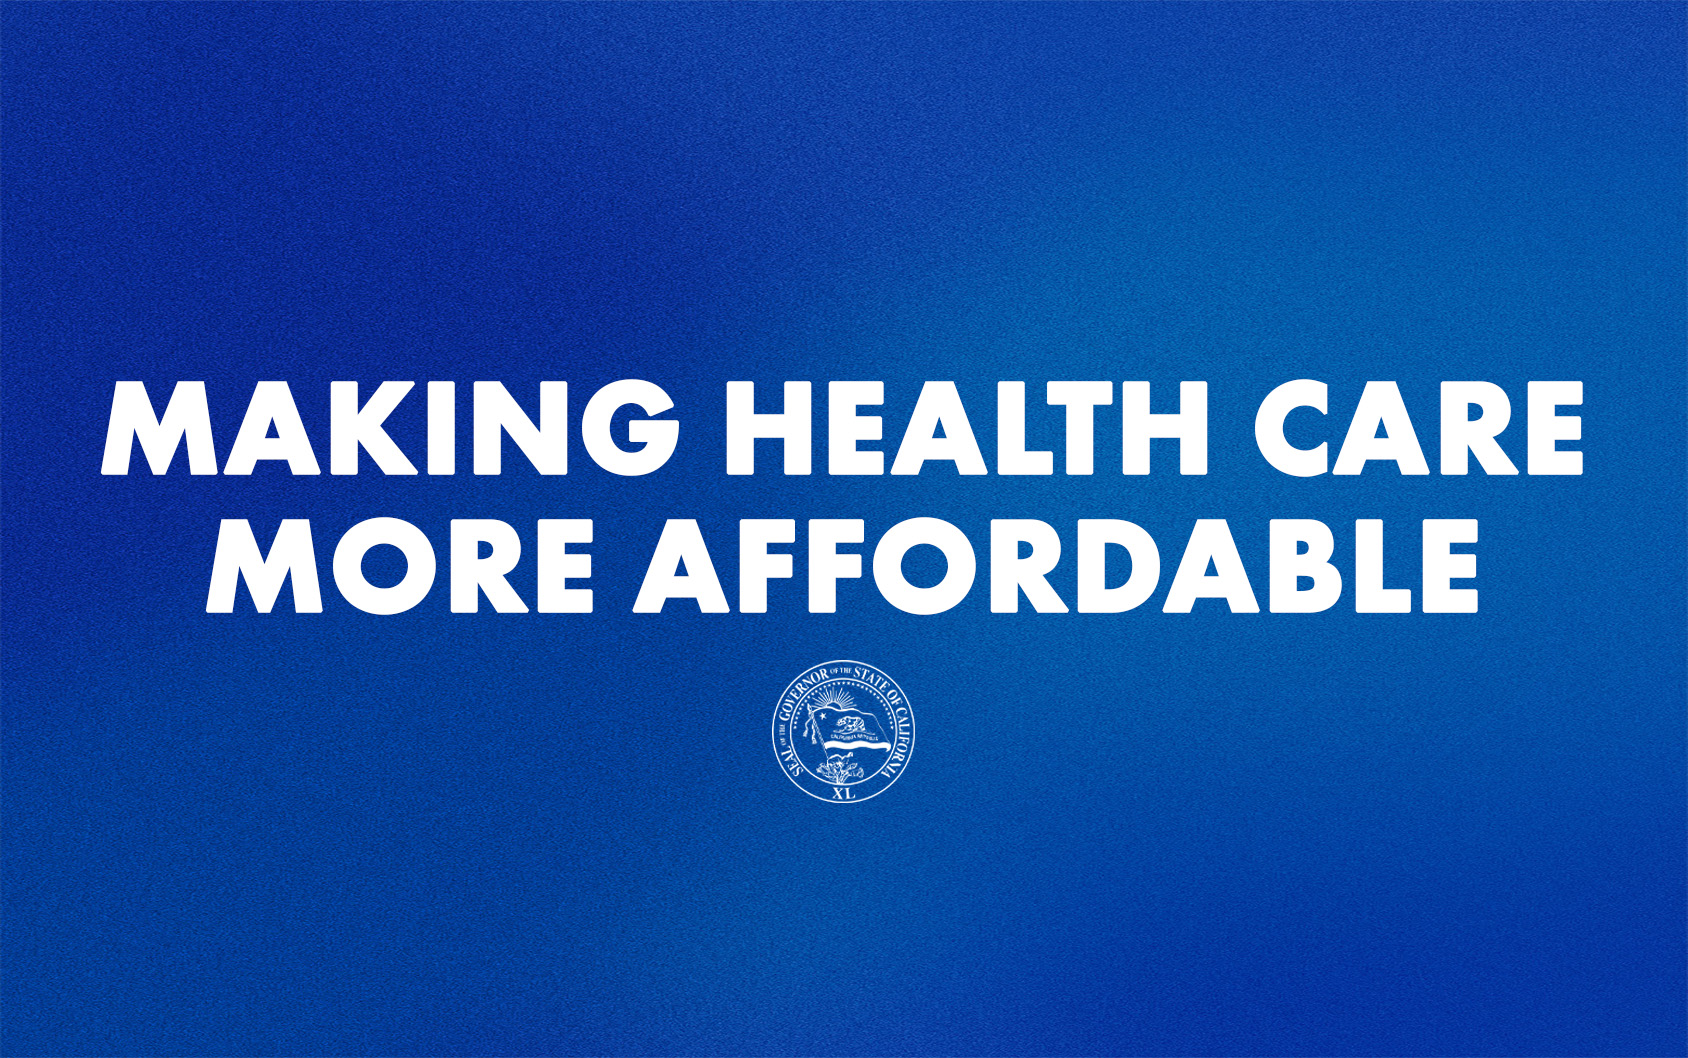 In Case You Missed It: Newsom Administration Takes Action to Control Rising Health Care Expenses